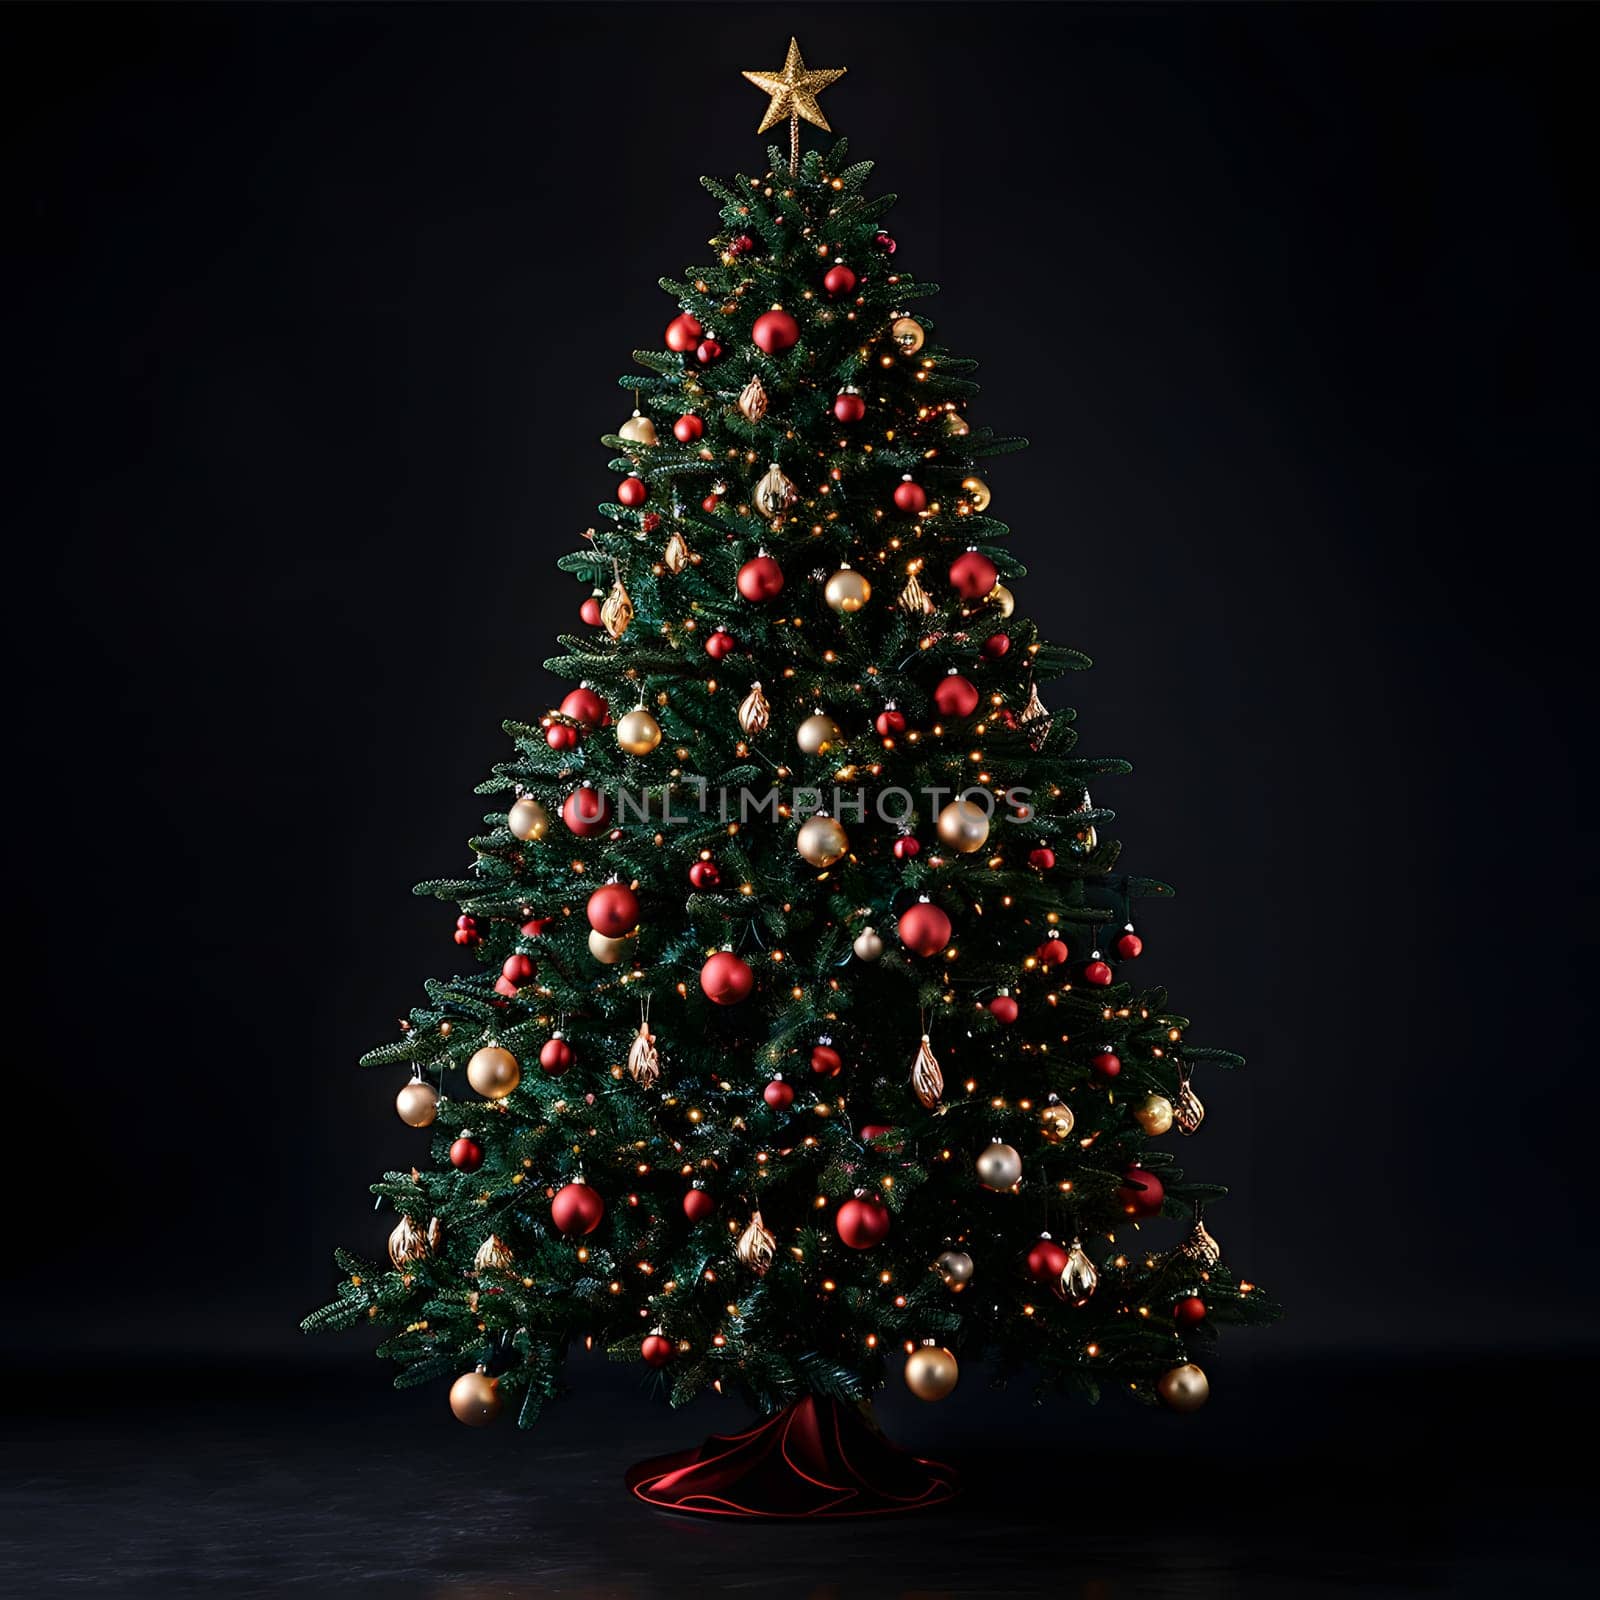 A festive Christmas tree adorned with red and gold ornaments, topped with a shimmering gold star. The tree, a beautiful larch, is the centerpiece of holiday decoration